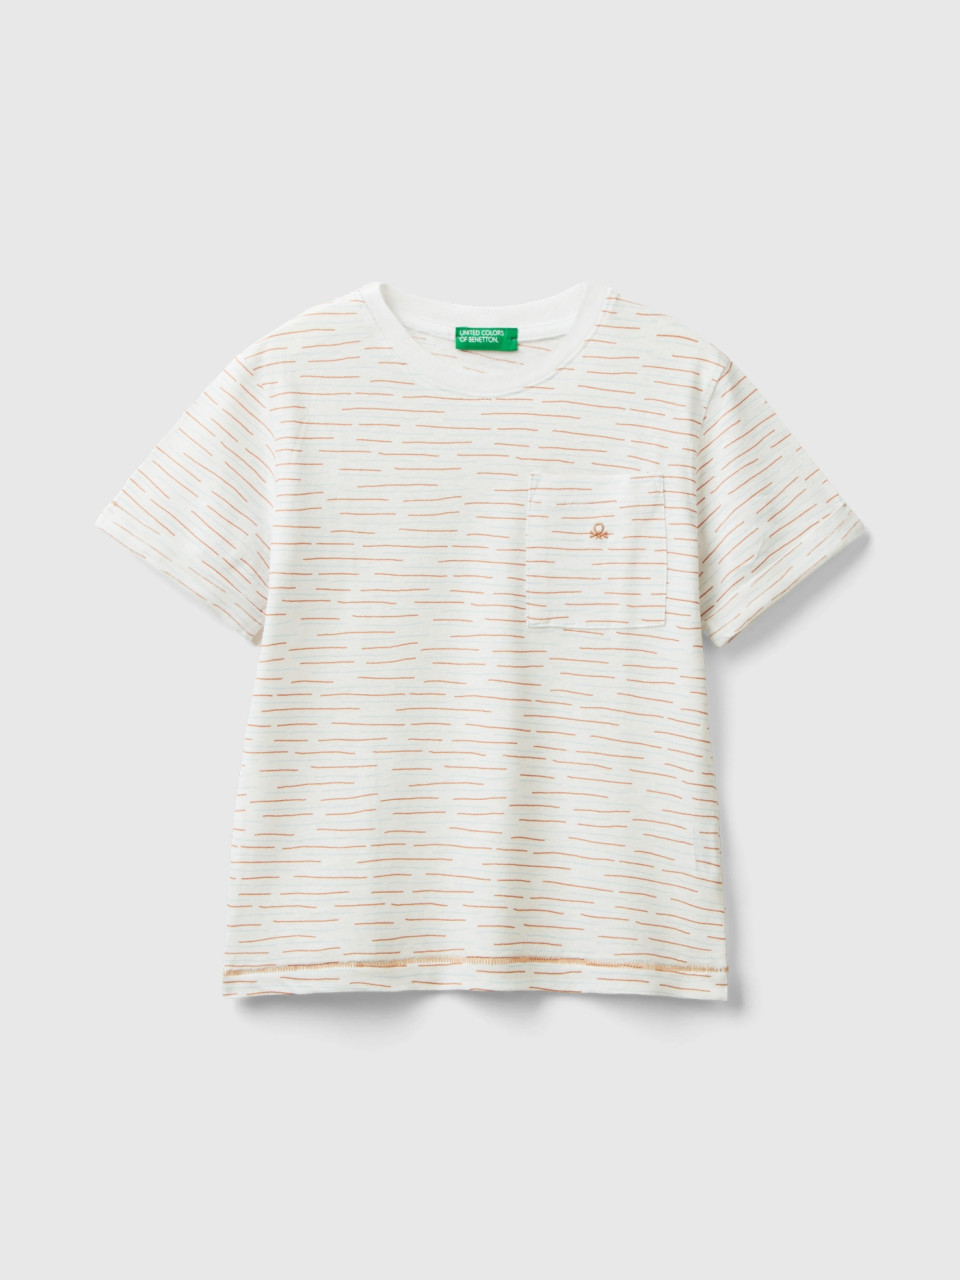 Benetton, T-shirt With Print And Pocket, Creamy White, Kids